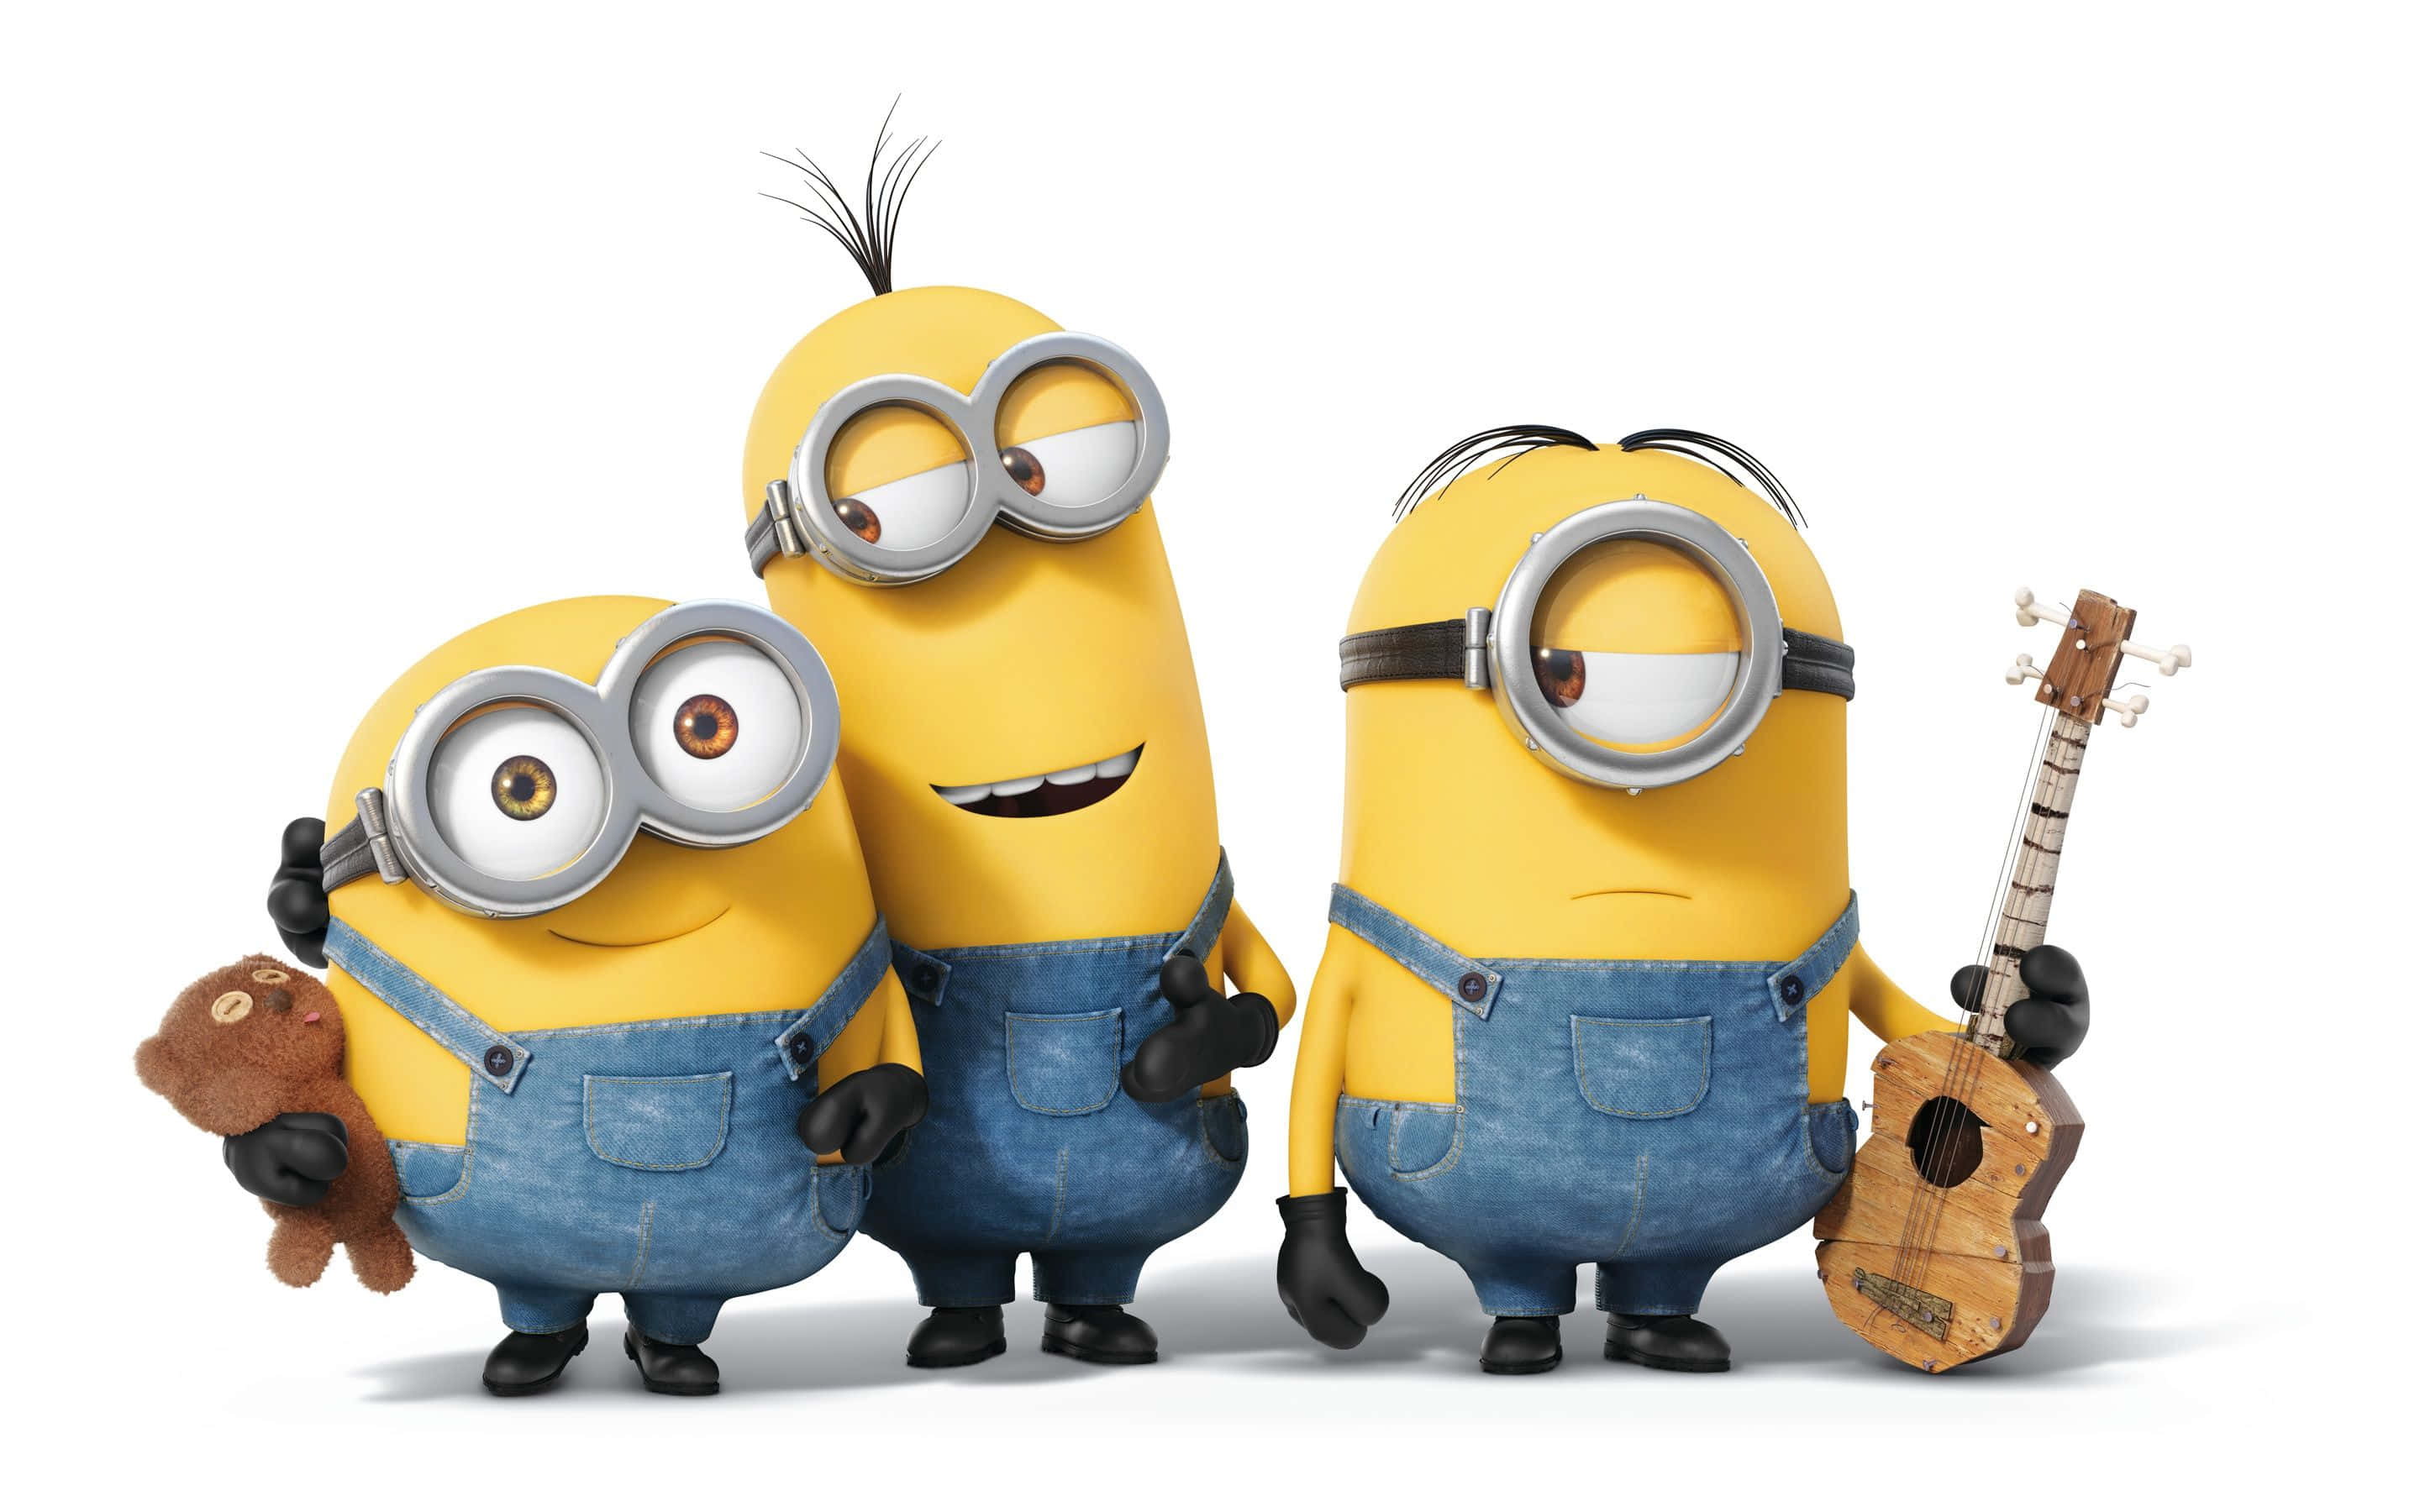 Get ready to join the Minions revolution!